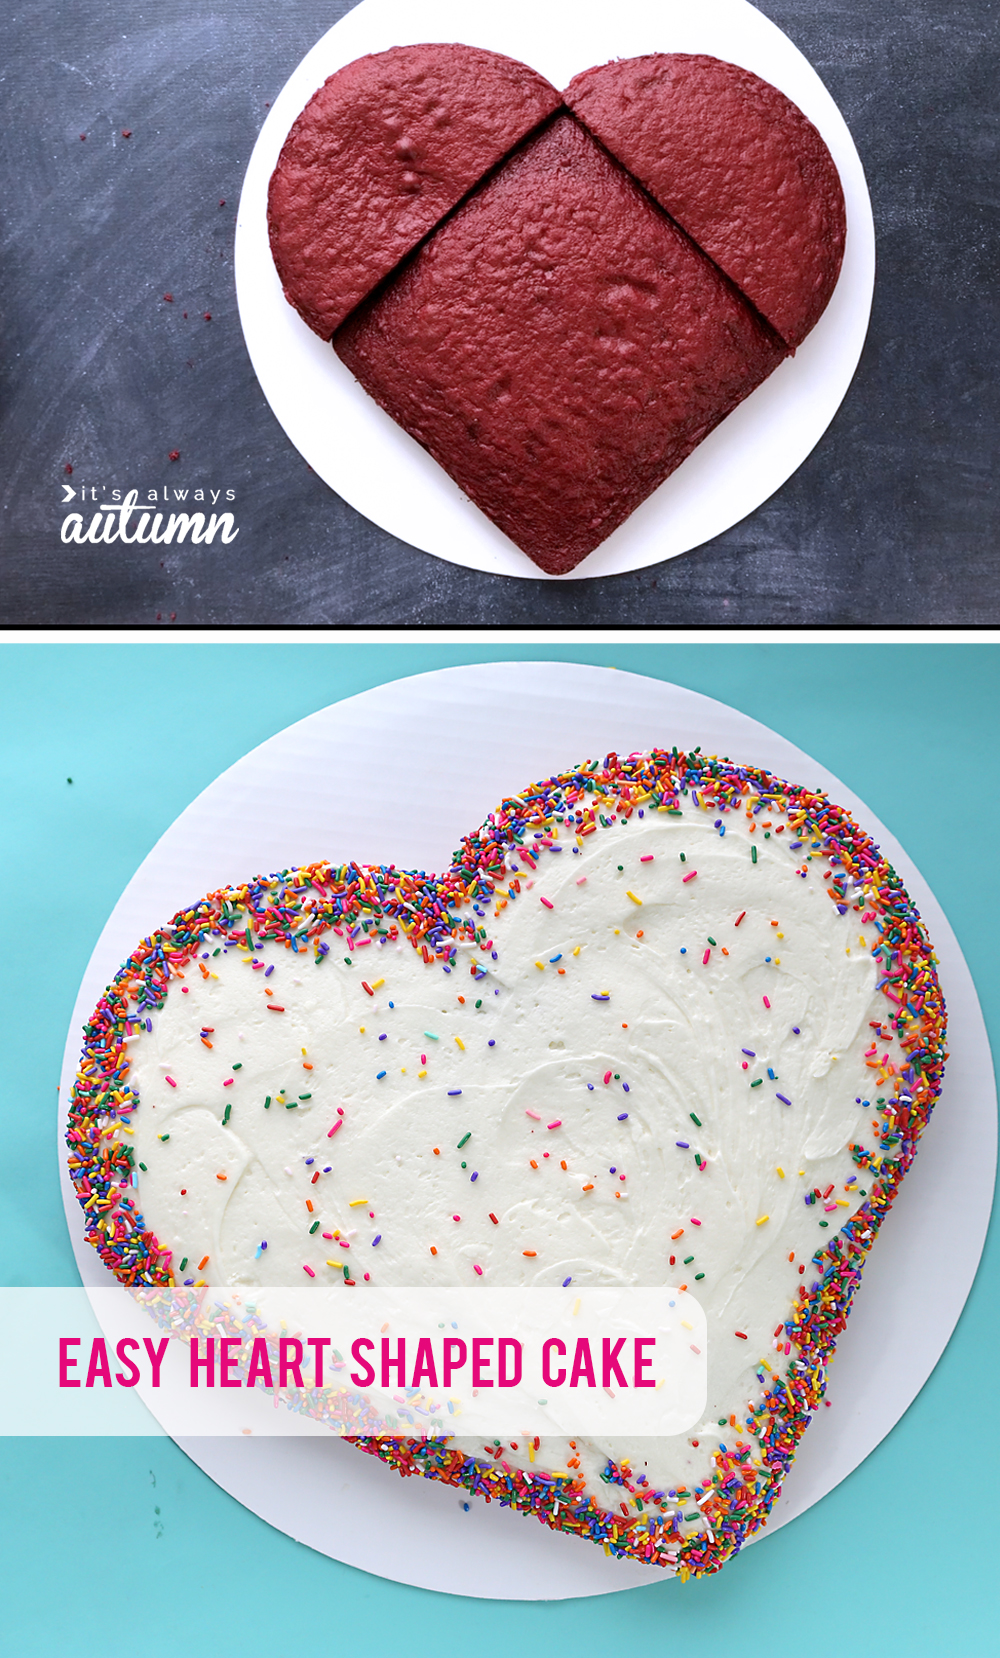 Make a heart shaped cake for Valentine's Day four different ways